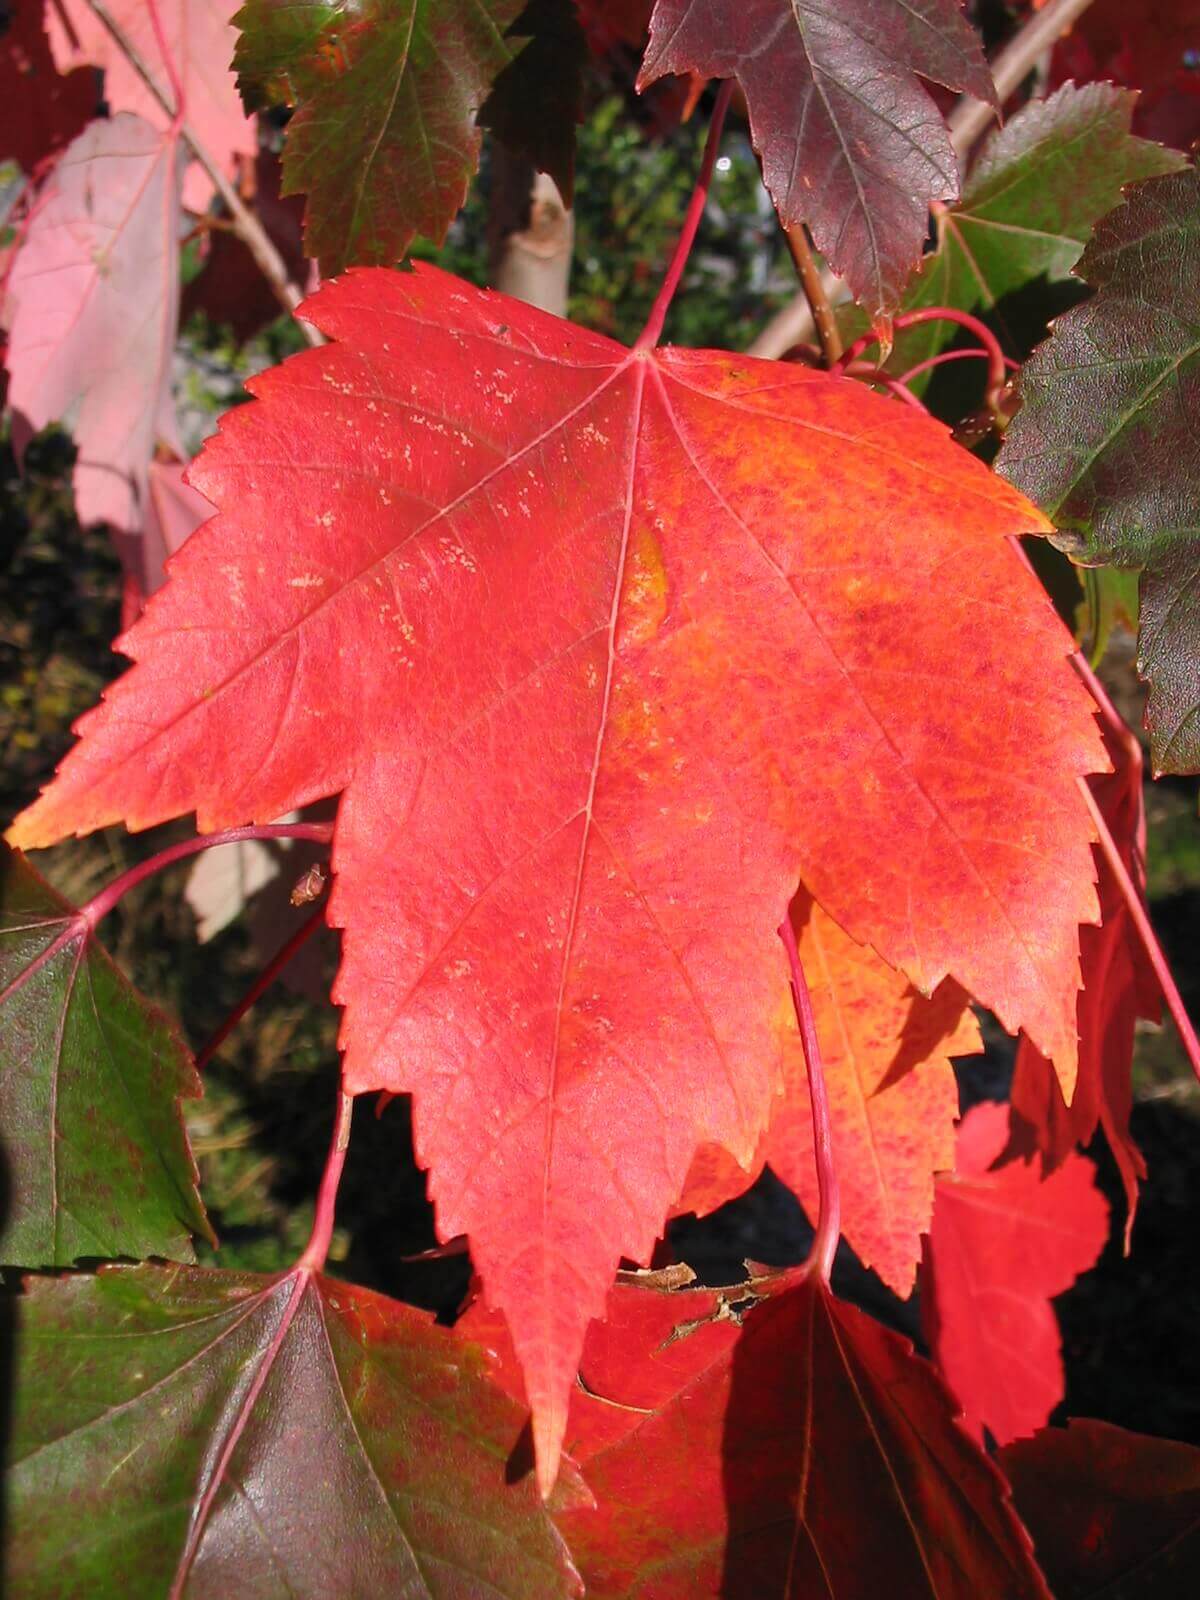 Acer rubrum (Canadian maple, Red maple, Scarlet maple, Swamp maple